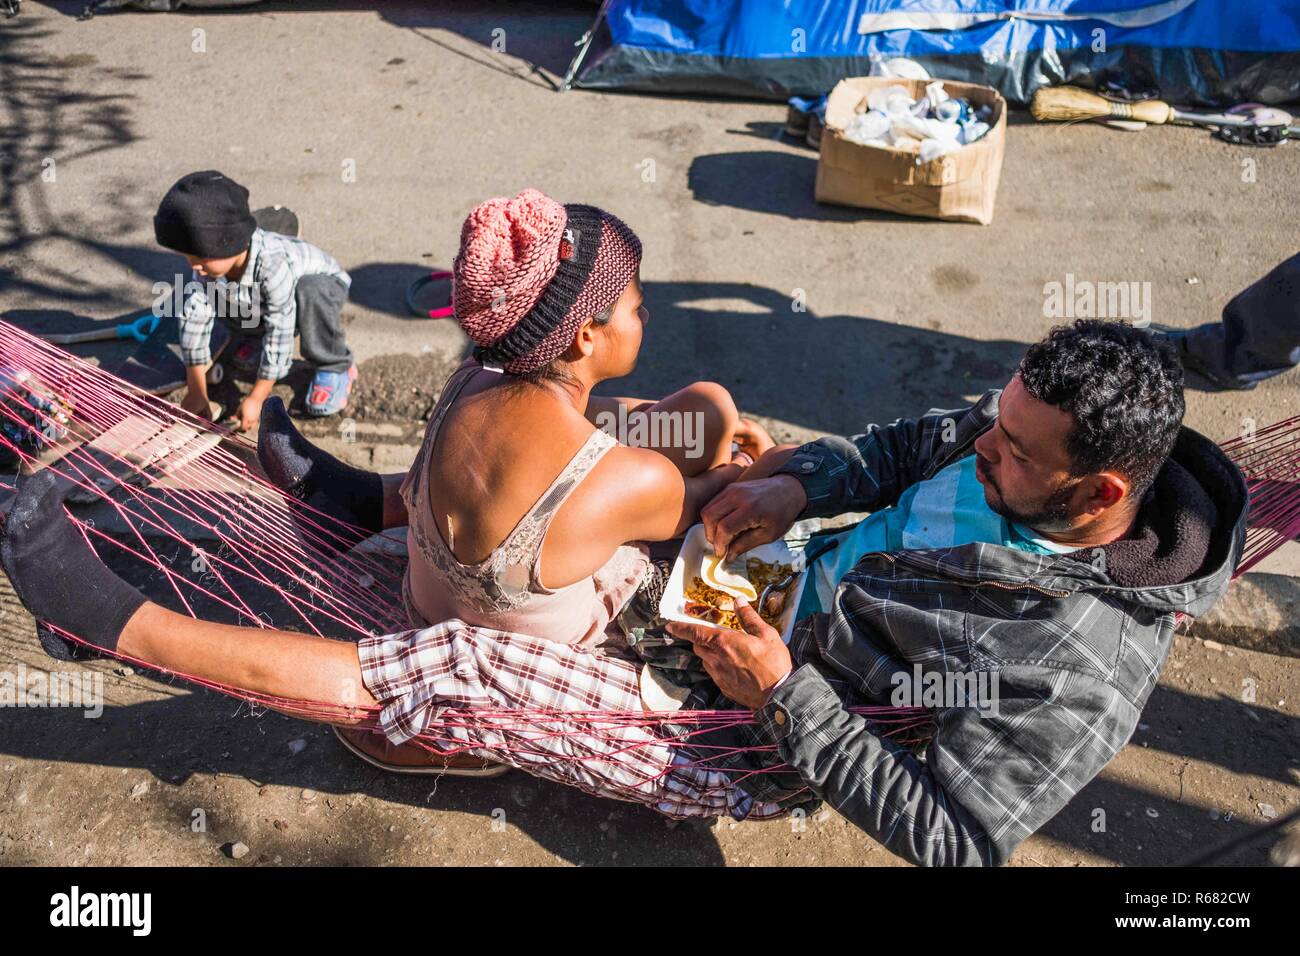 Members of the migrant caravan are seen resting in makeshift conditions as they await for asylum in the United States. Around 6,000 migrants are staying in a new temporary shelter where they wait for asylum in the United States. Stock Photo